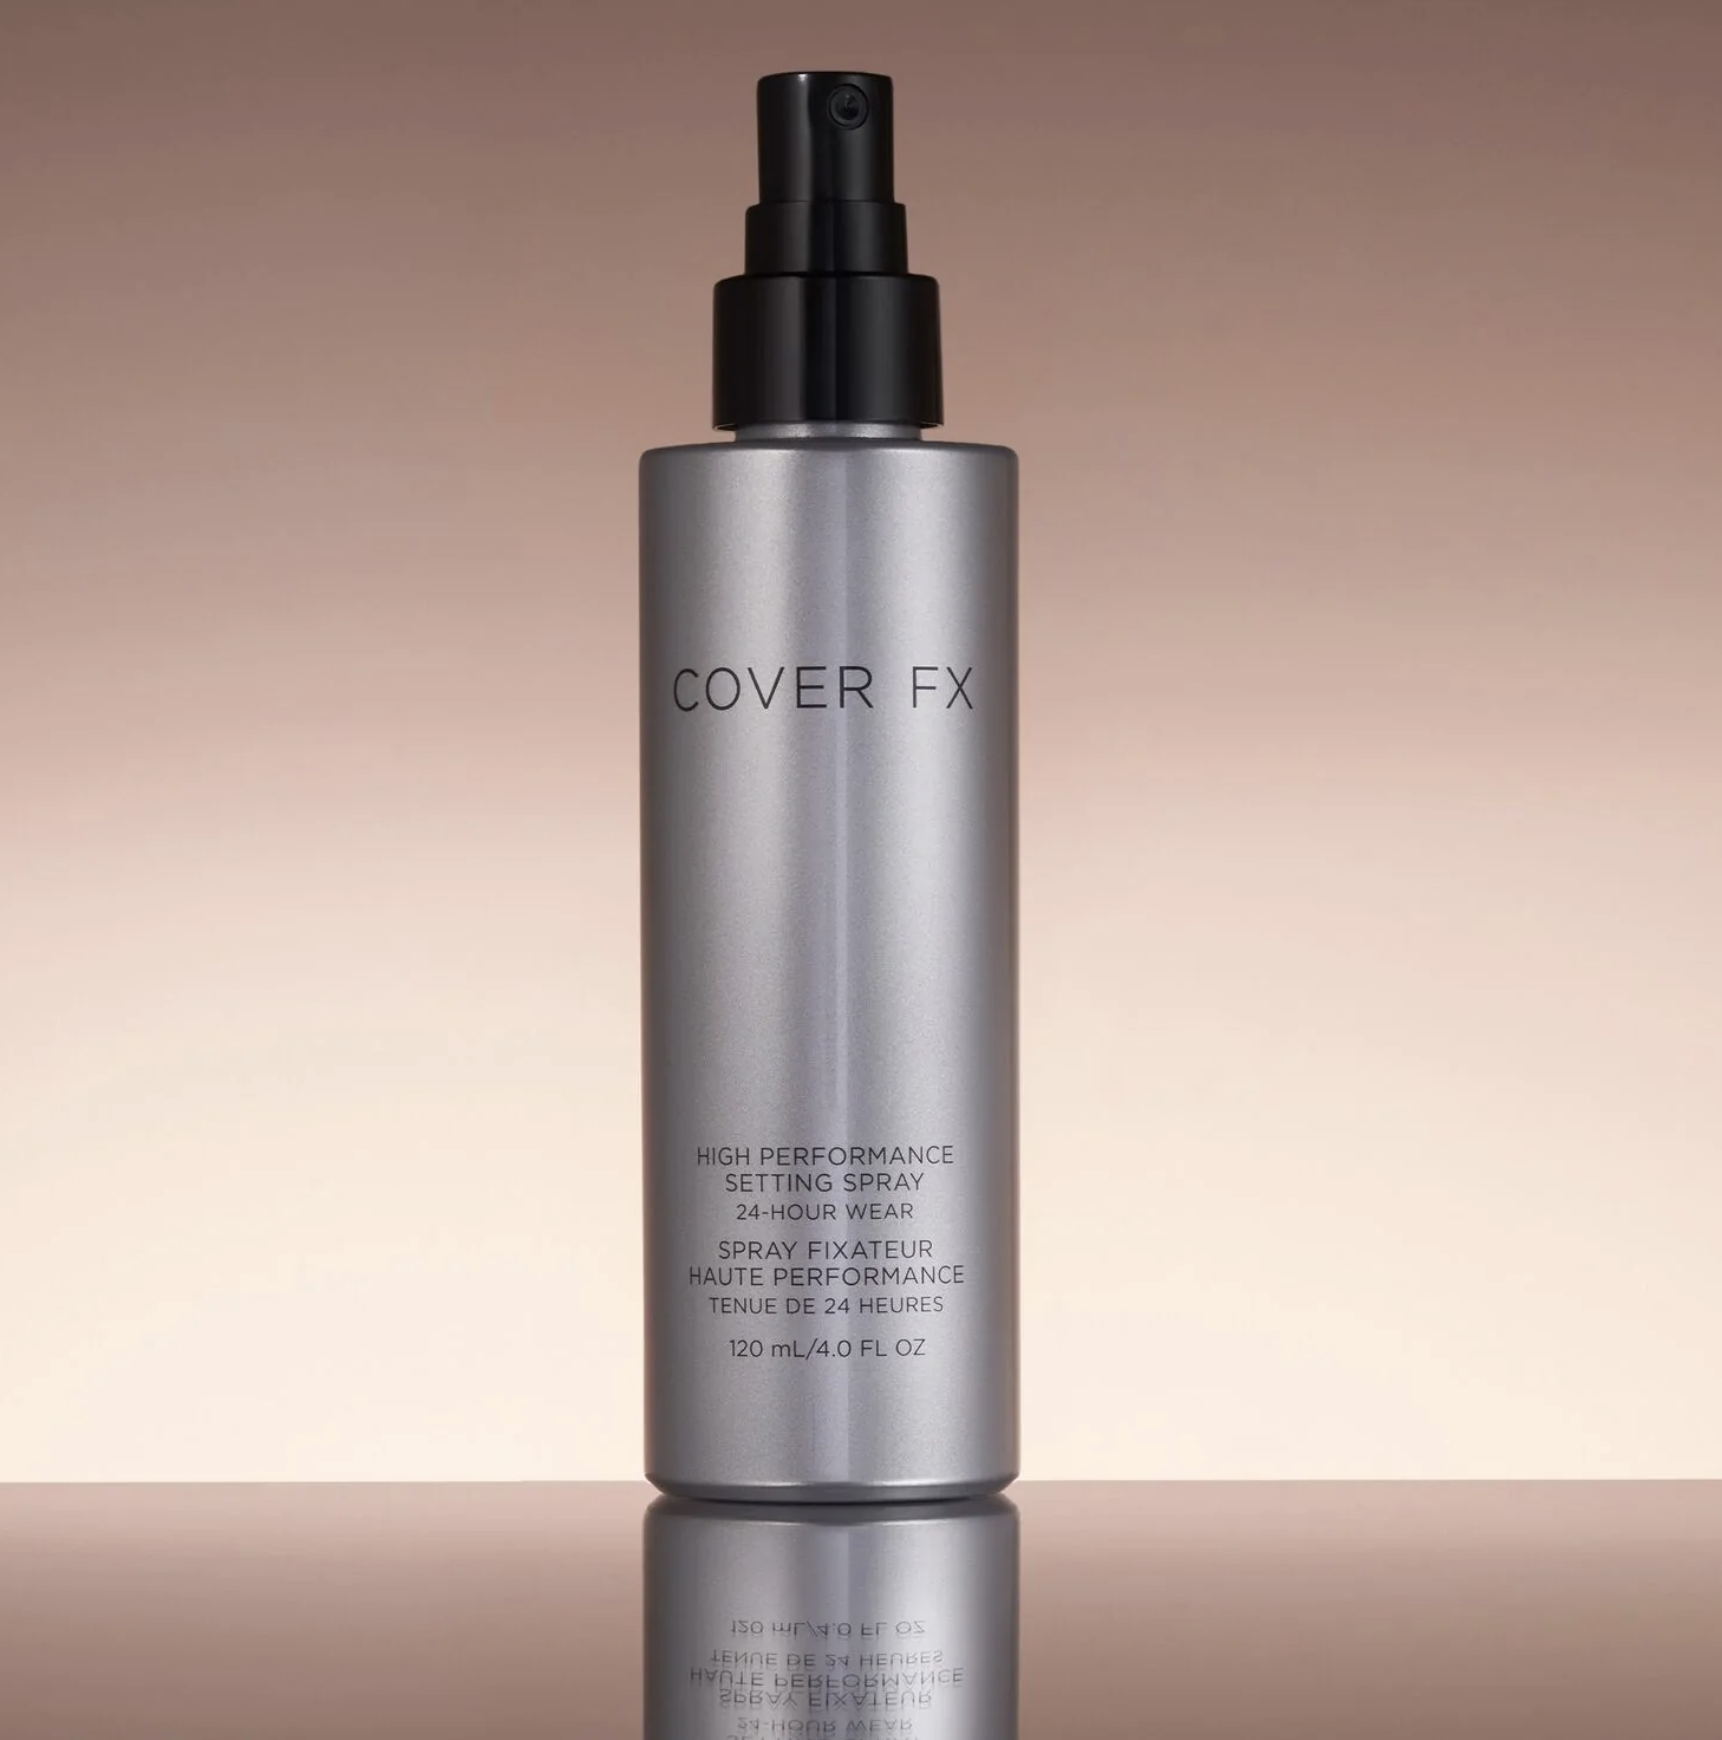 High performance setting spray for the whole day